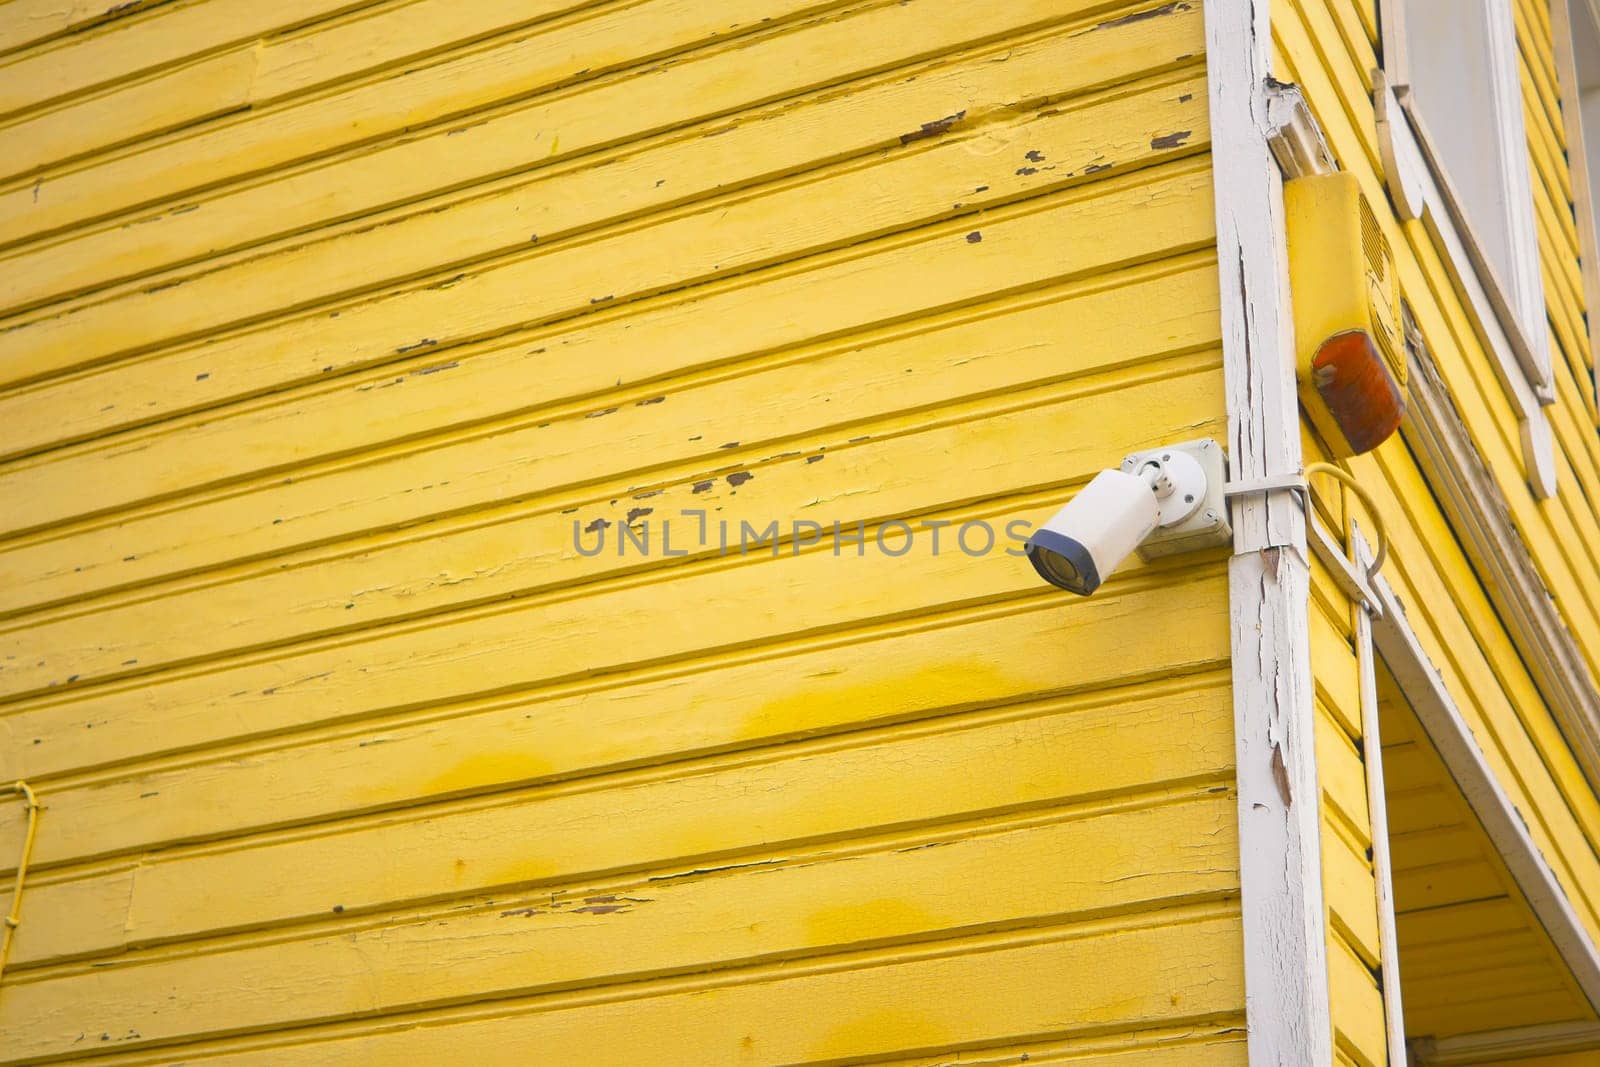 CCTV security camera operating outdoor by towfiq007